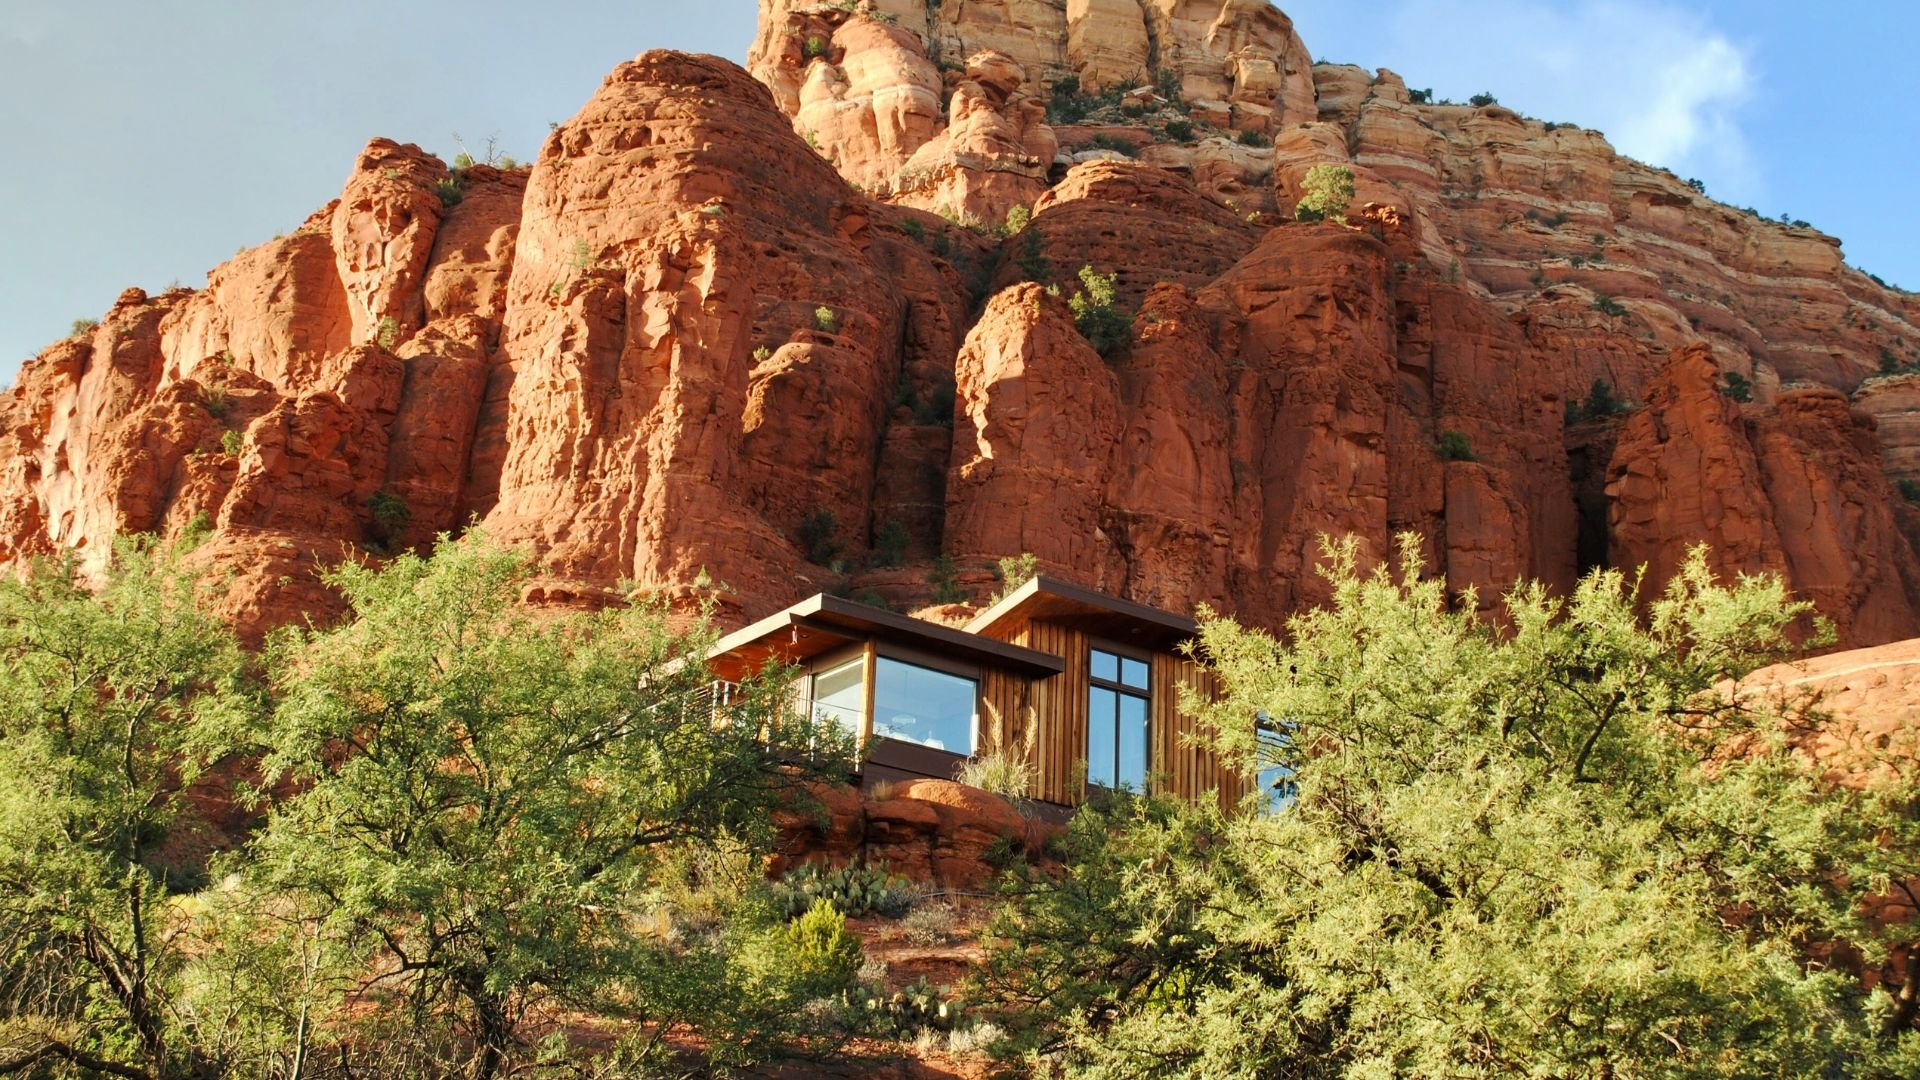 <p>Sedona has become a tourist attraction in Arizona, as many travelers have chosen to visit the picturesque town. This has resulted in many homes being used as short-term rentals.    </p> <p>It’s also led to housing prices skyrocketing in a short time frame. According to Zillow, the <a href="https://www.zillow.com/home-values/7005/sedona-az/">median home price</a> in this Arizona hotspot is almost a whopping $952,000.   </p>